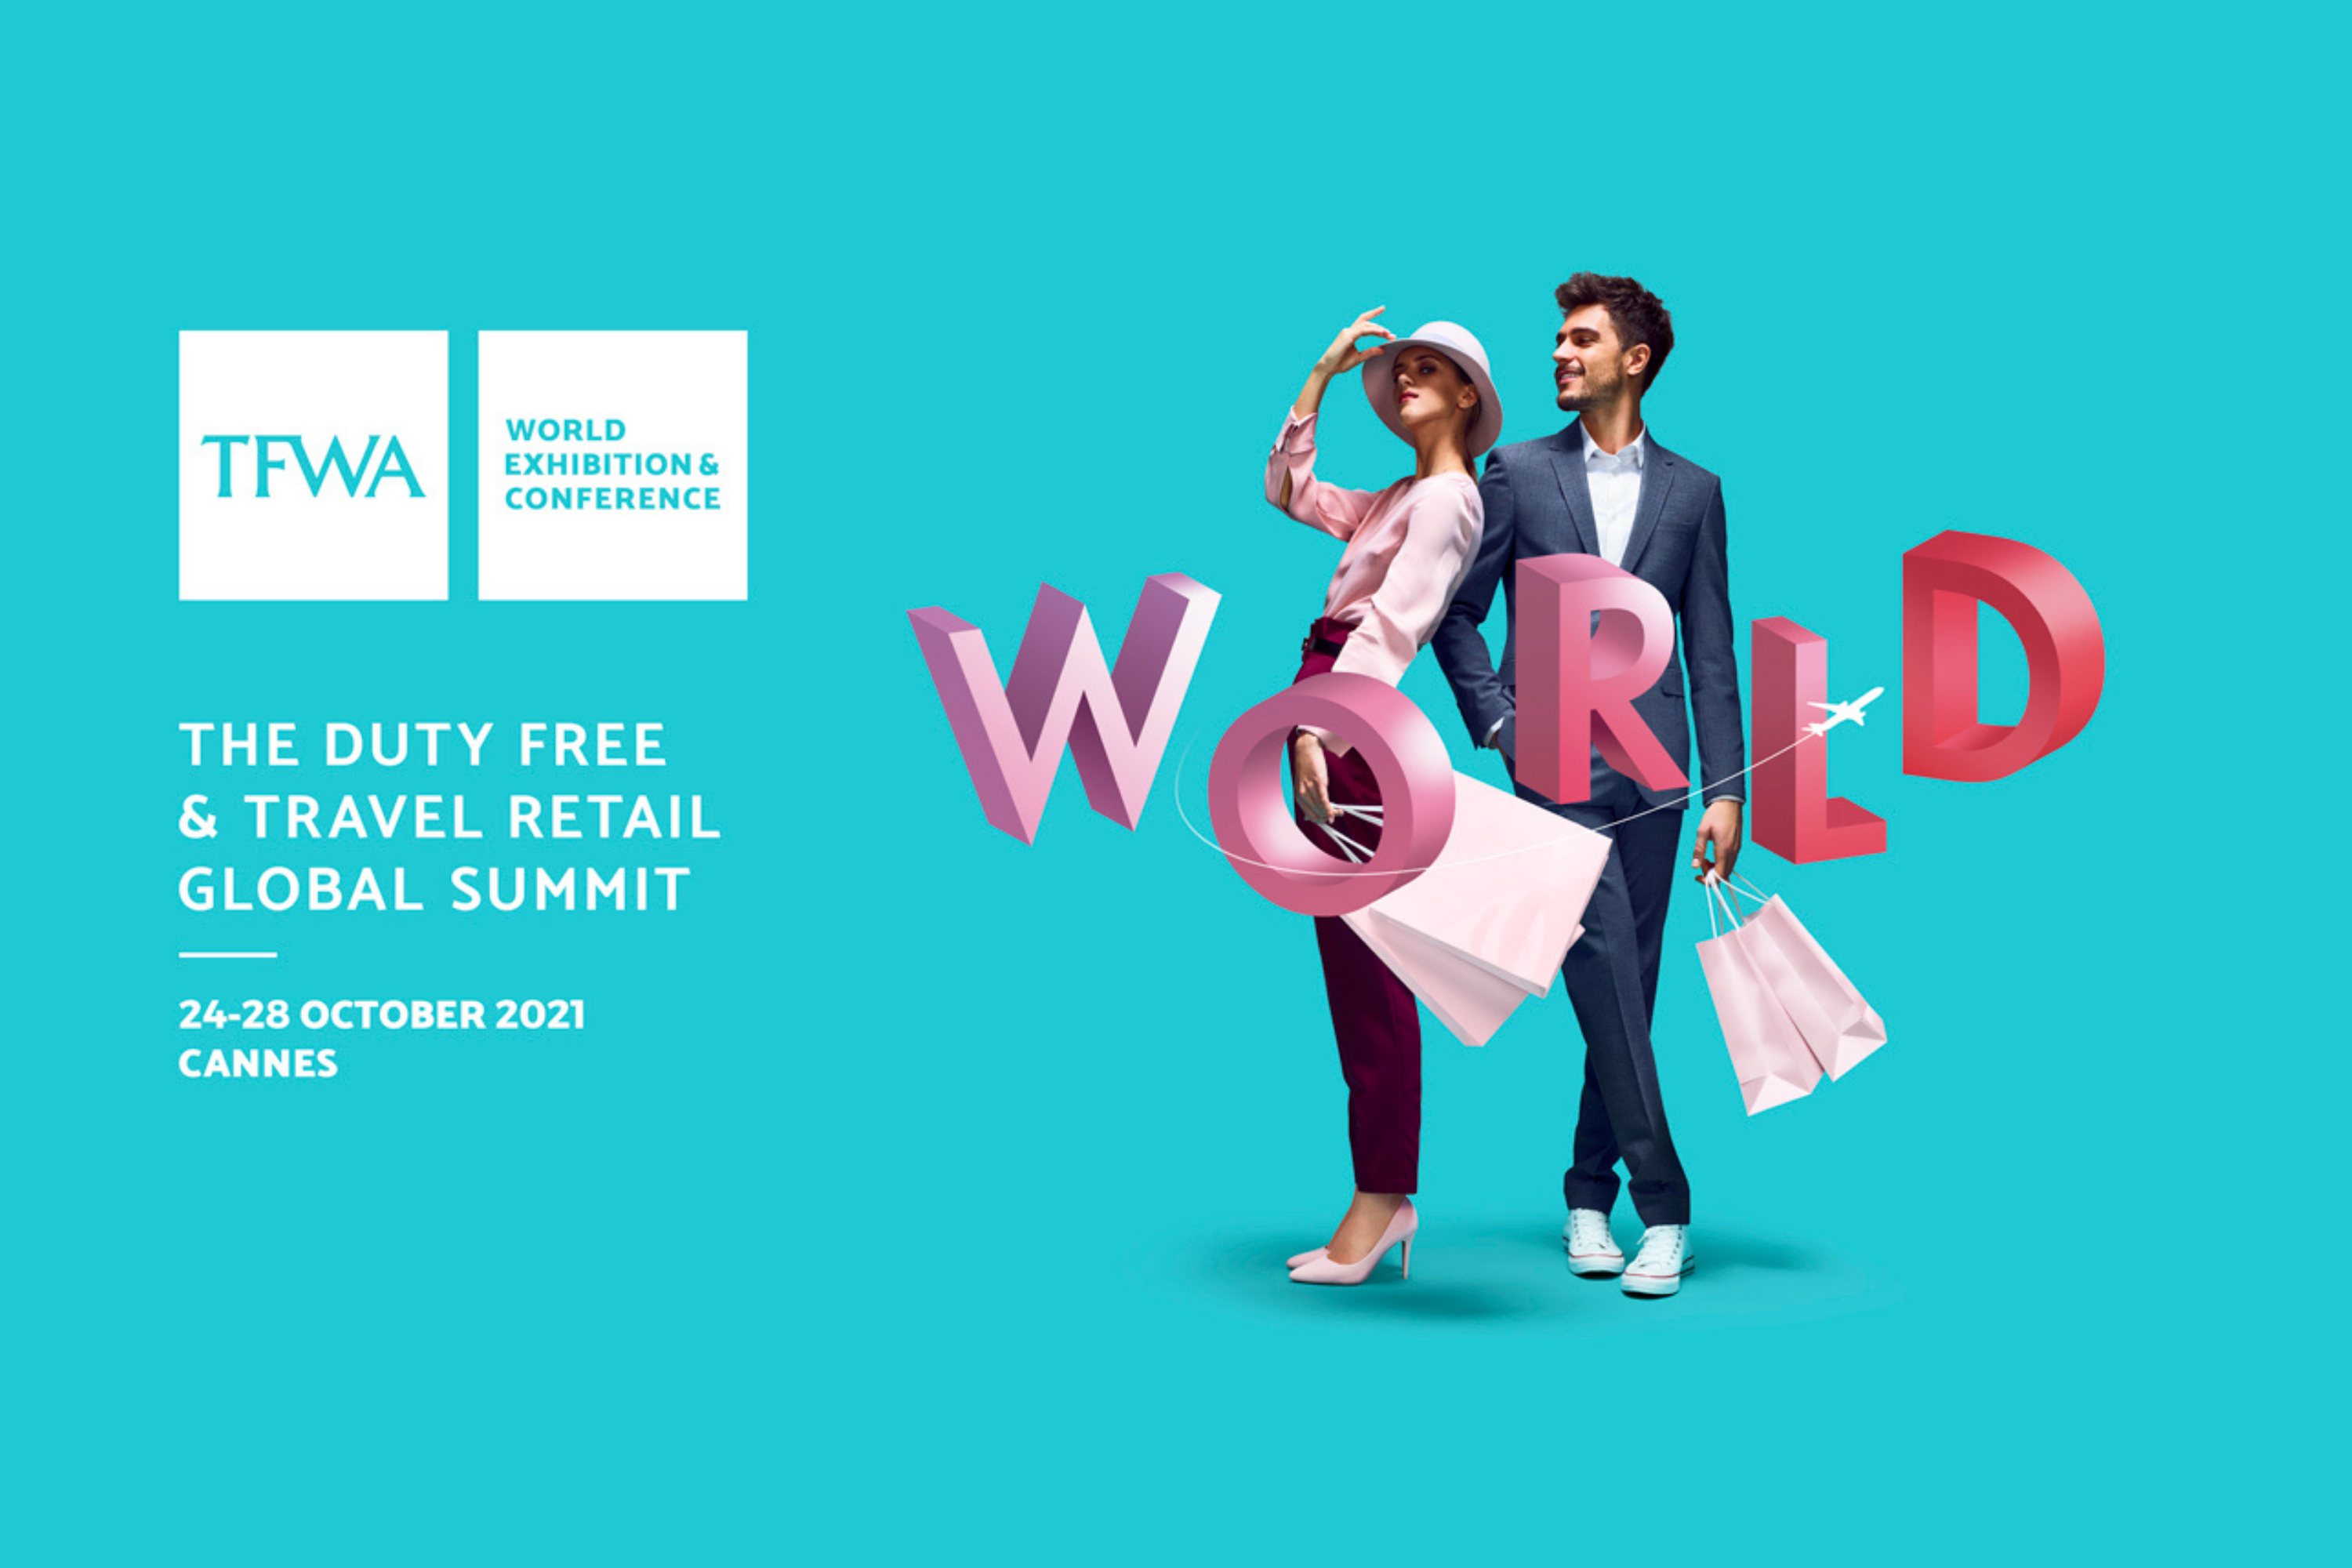 Leading brands confirm plans to exhibit at TFWA World Exhibition & Conference